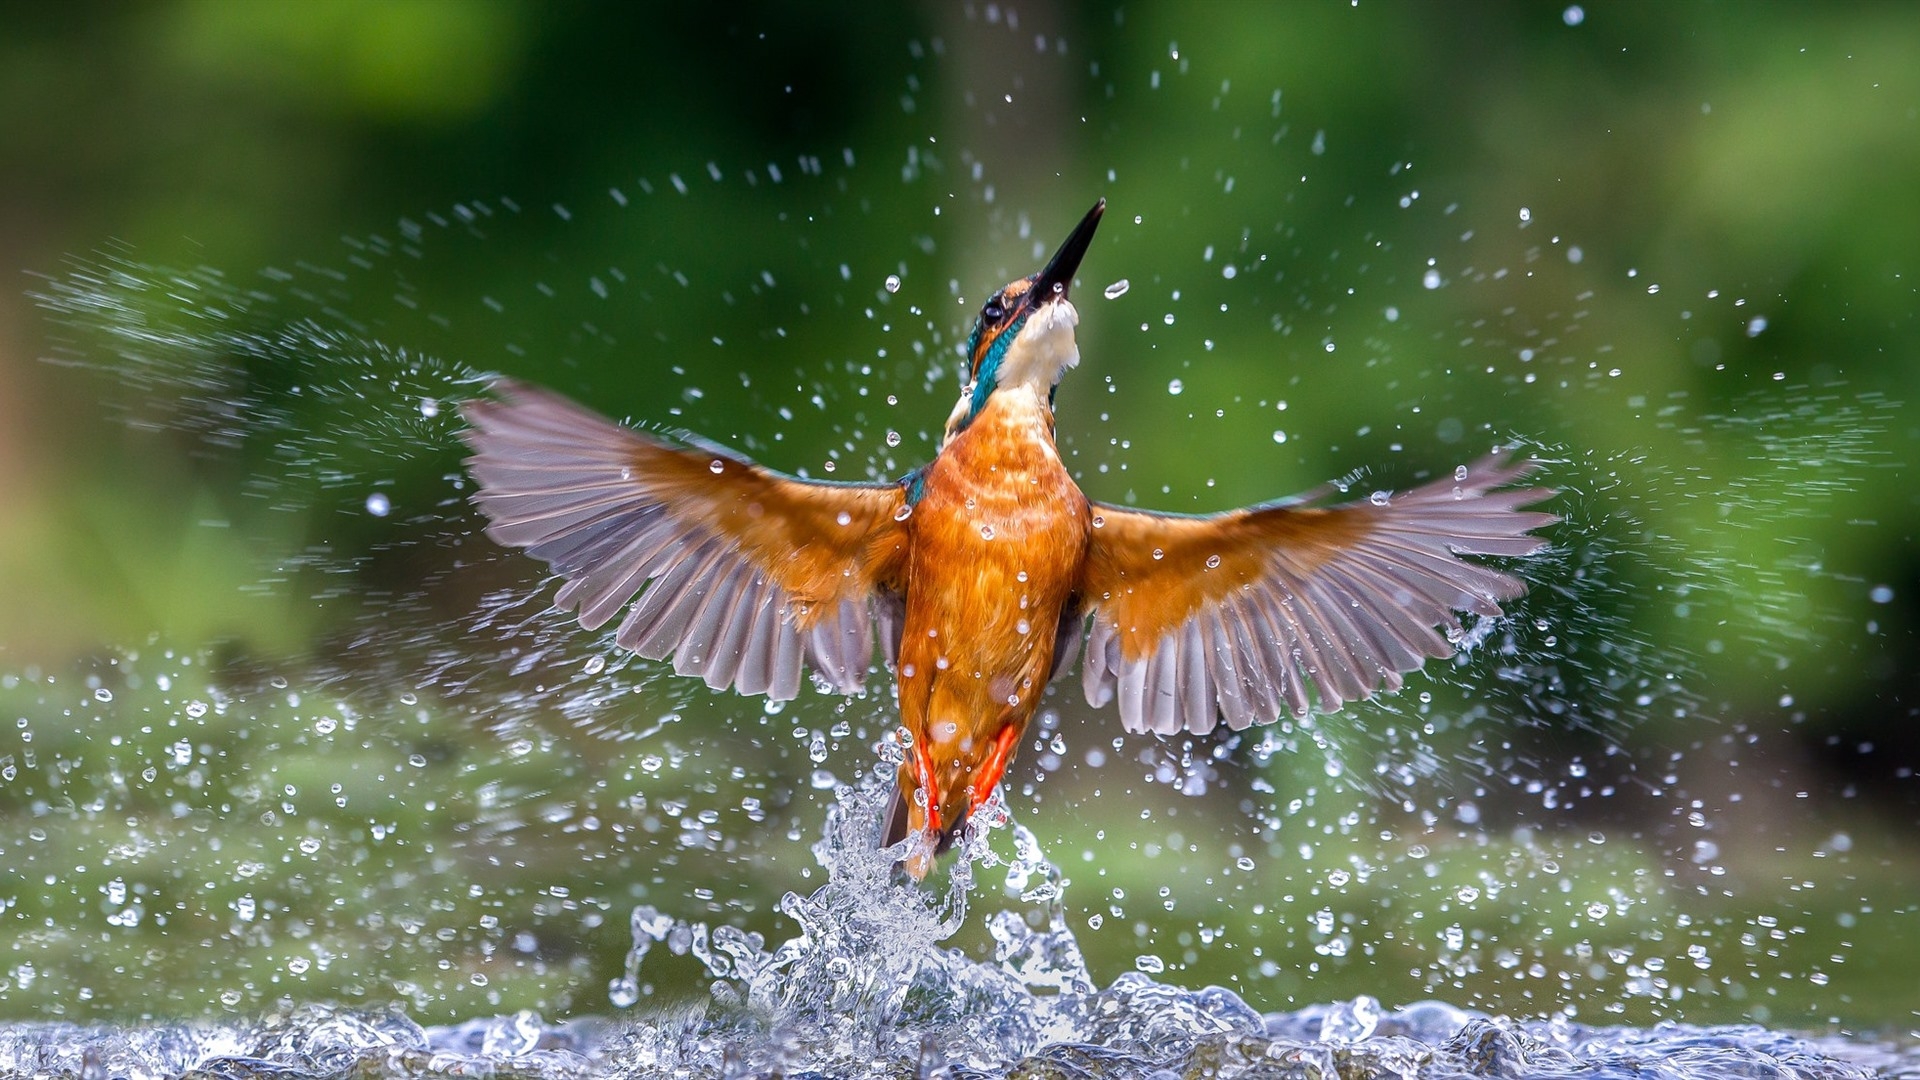 A kingfisher comes out of the water.